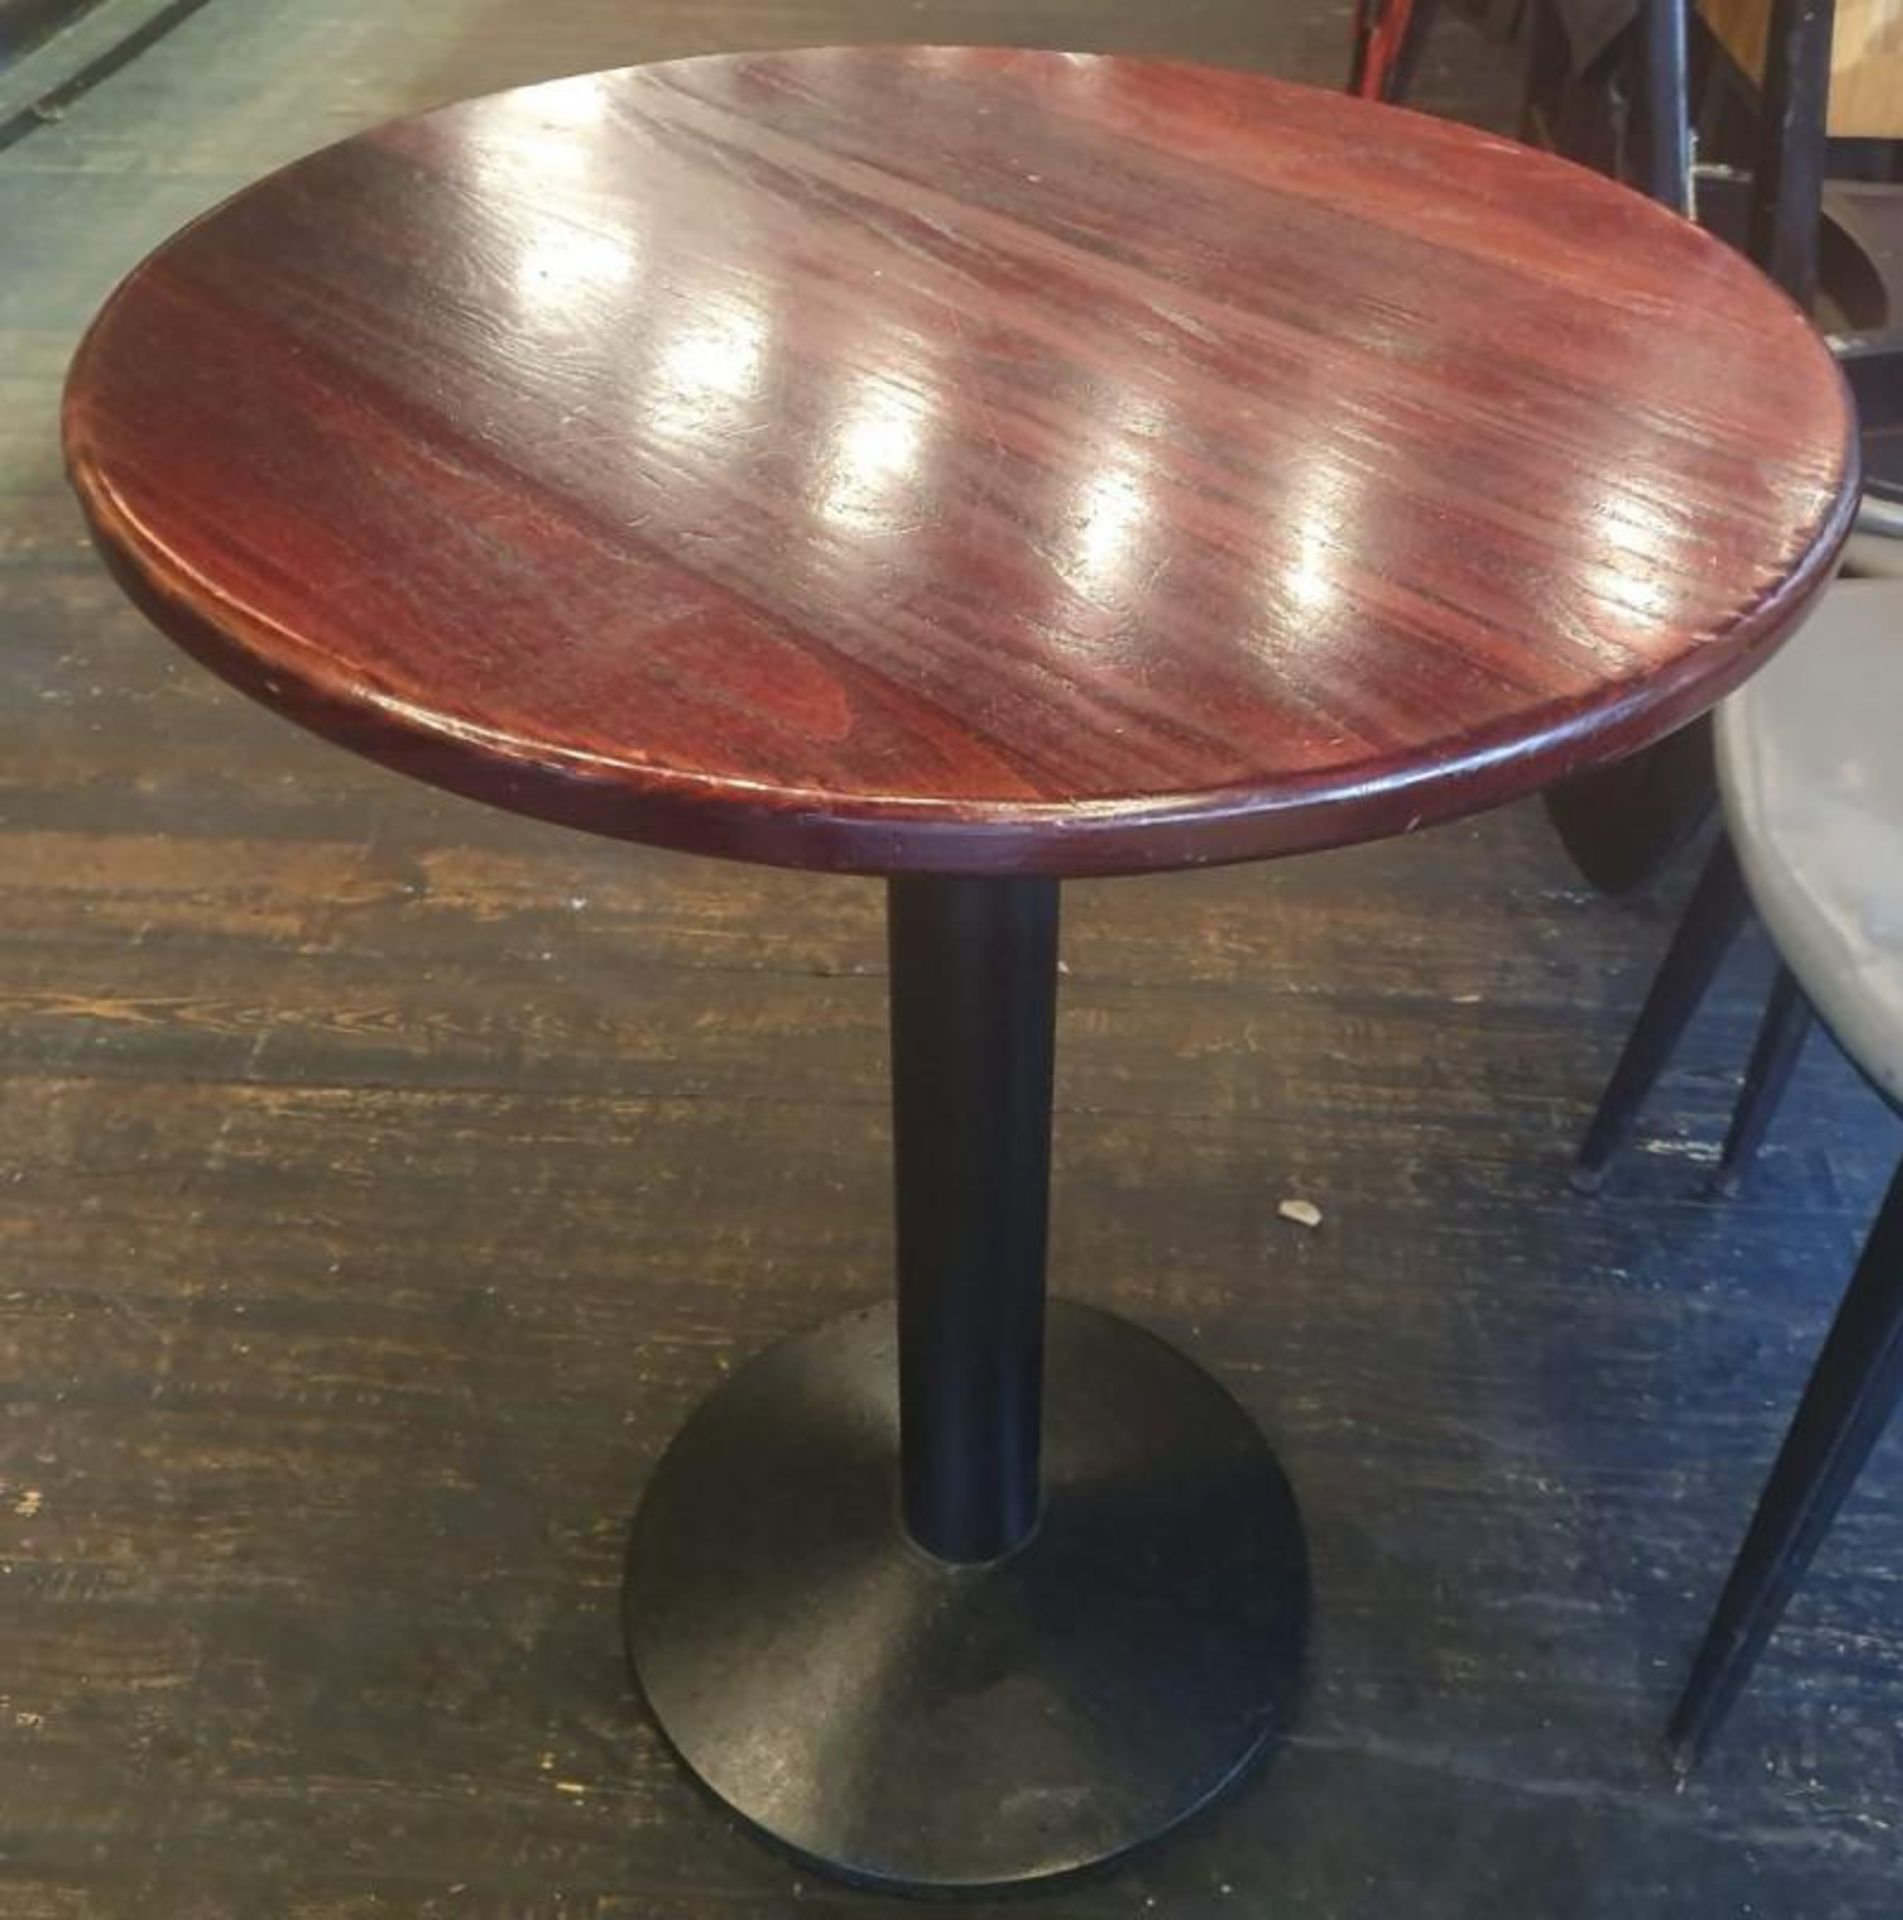 3 x Round Bistro Tables With Cherry Wood Tops - Dimensions: Diameter 61cm, Height 77cm - Recently Ta - Image 2 of 3